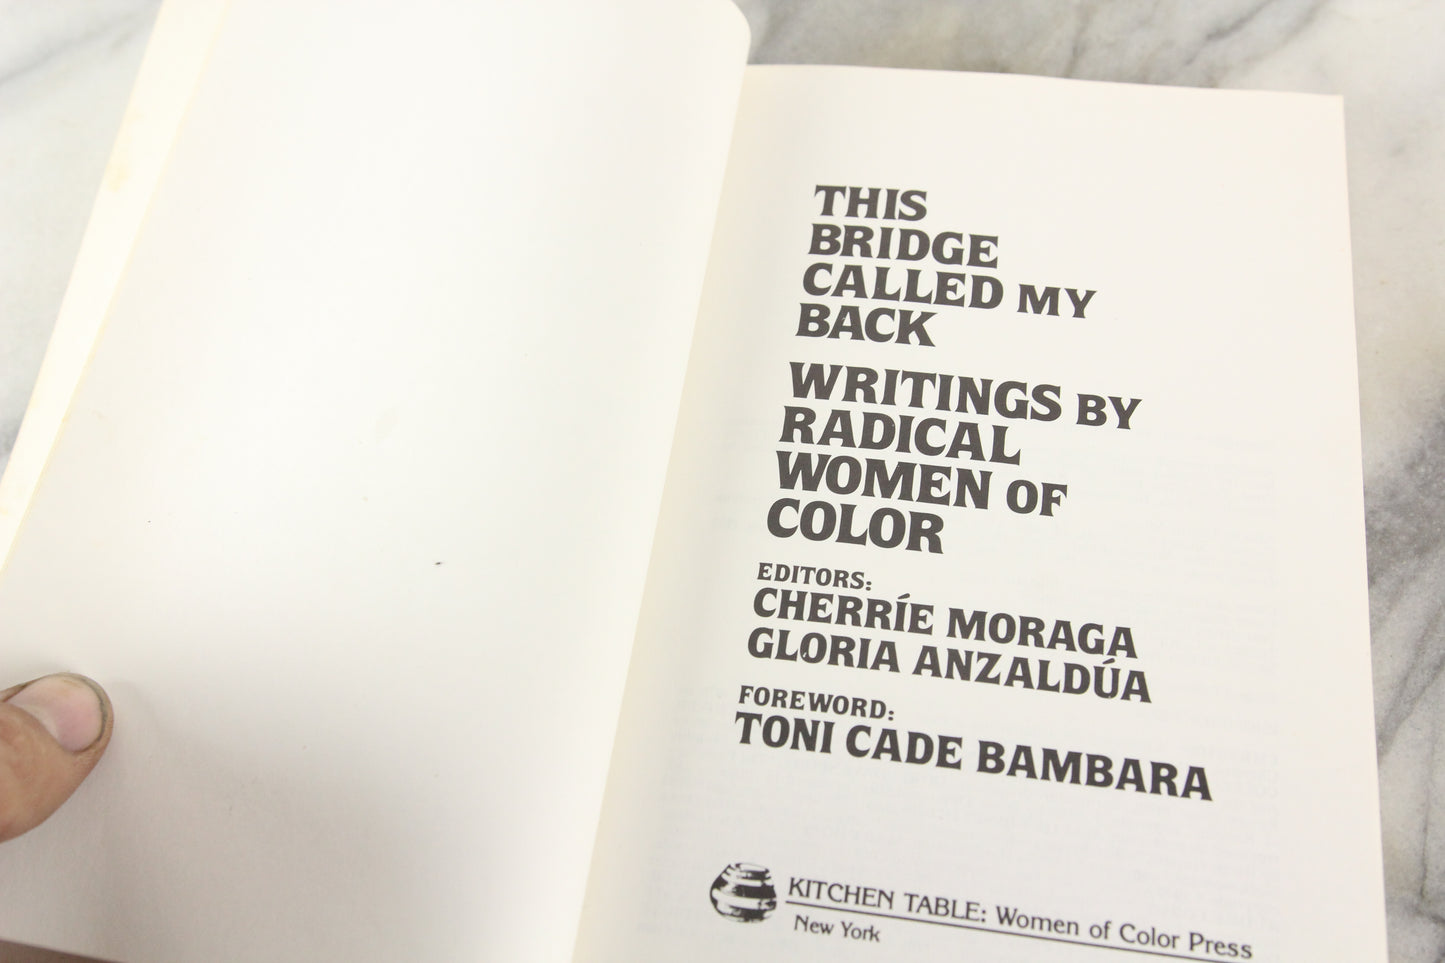 This Bridge Called My Back: Writings by Radical Women of Color, Copyright 1983